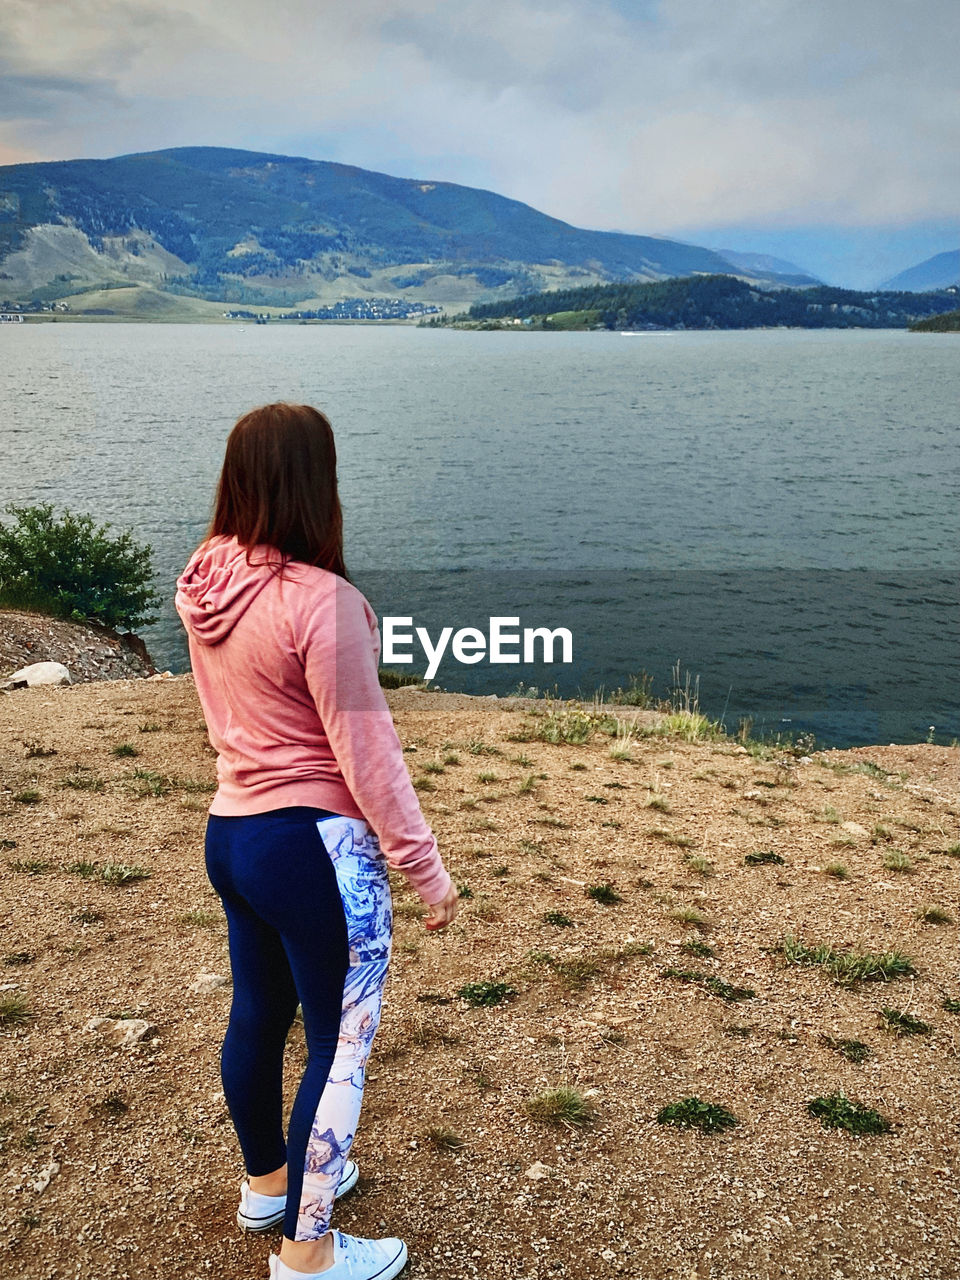 one person, water, rear view, mountain, women, sea, nature, full length, scenics - nature, leisure activity, beauty in nature, land, adult, sky, lifestyles, casual clothing, tranquility, beach, vacation, tranquil scene, landscape, environment, day, hairstyle, shore, female, mountain range, relaxation, trip, non-urban scene, outdoors, holiday, cloud, blue, long hair, standing, walking, sunlight, young adult, solitude, clothing, brown hair, child